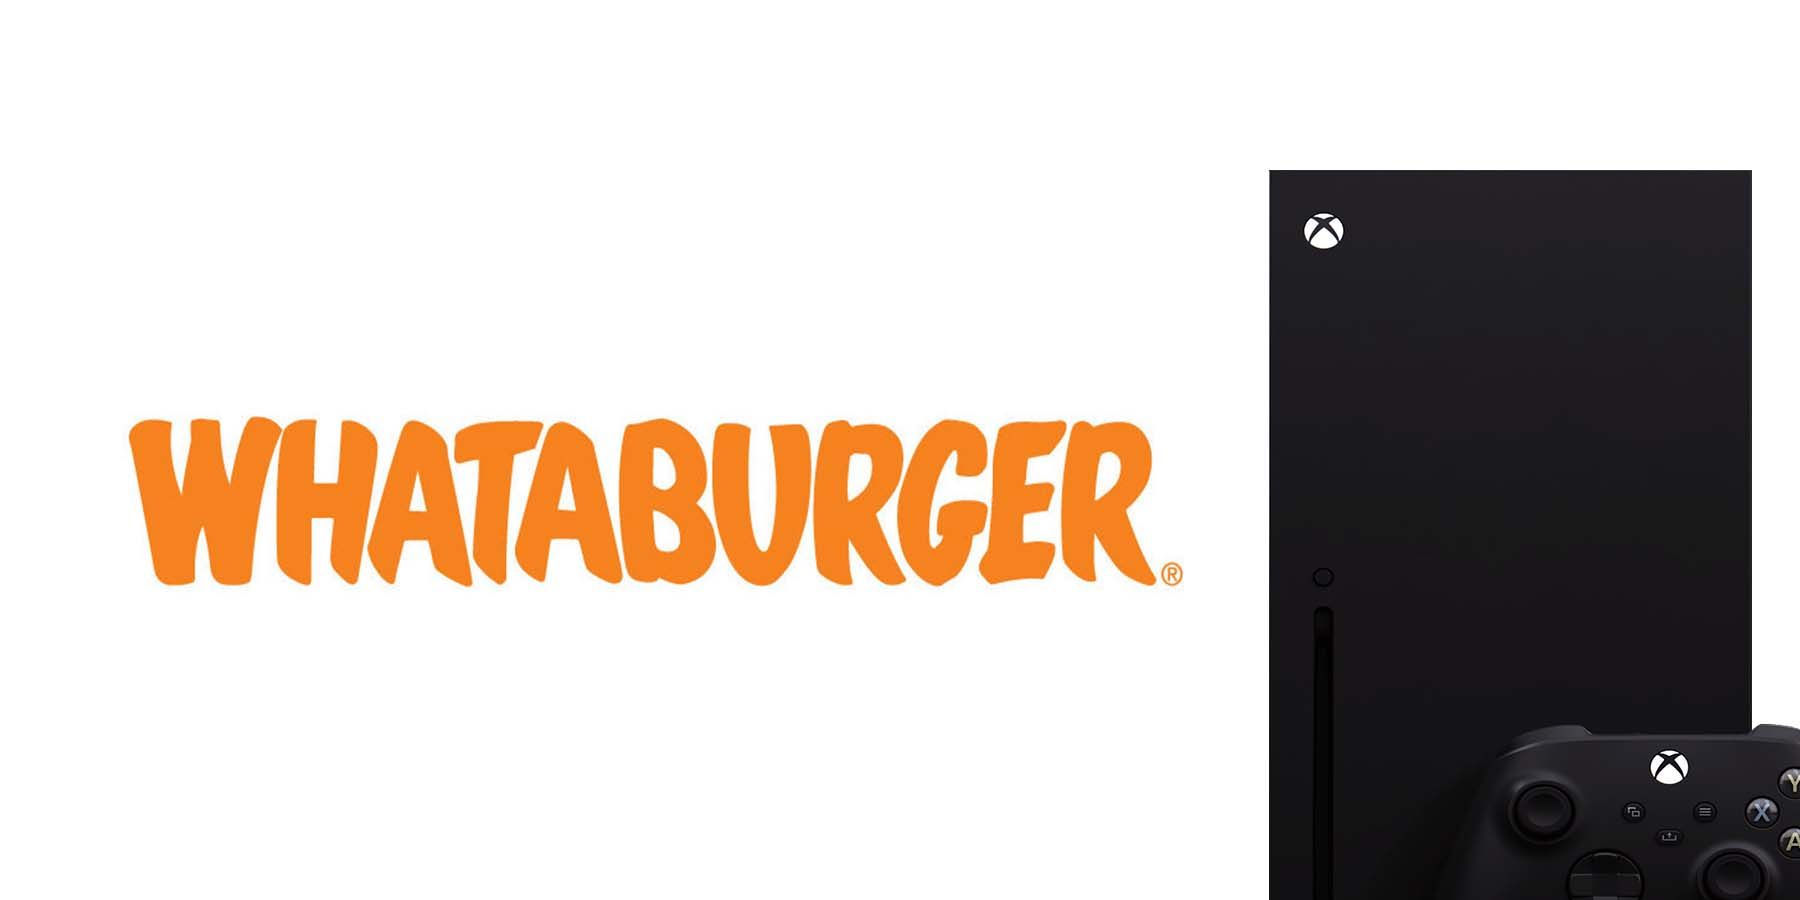 WhataburgerThemed Xbox Series X Console Up for Grabs in New Contest